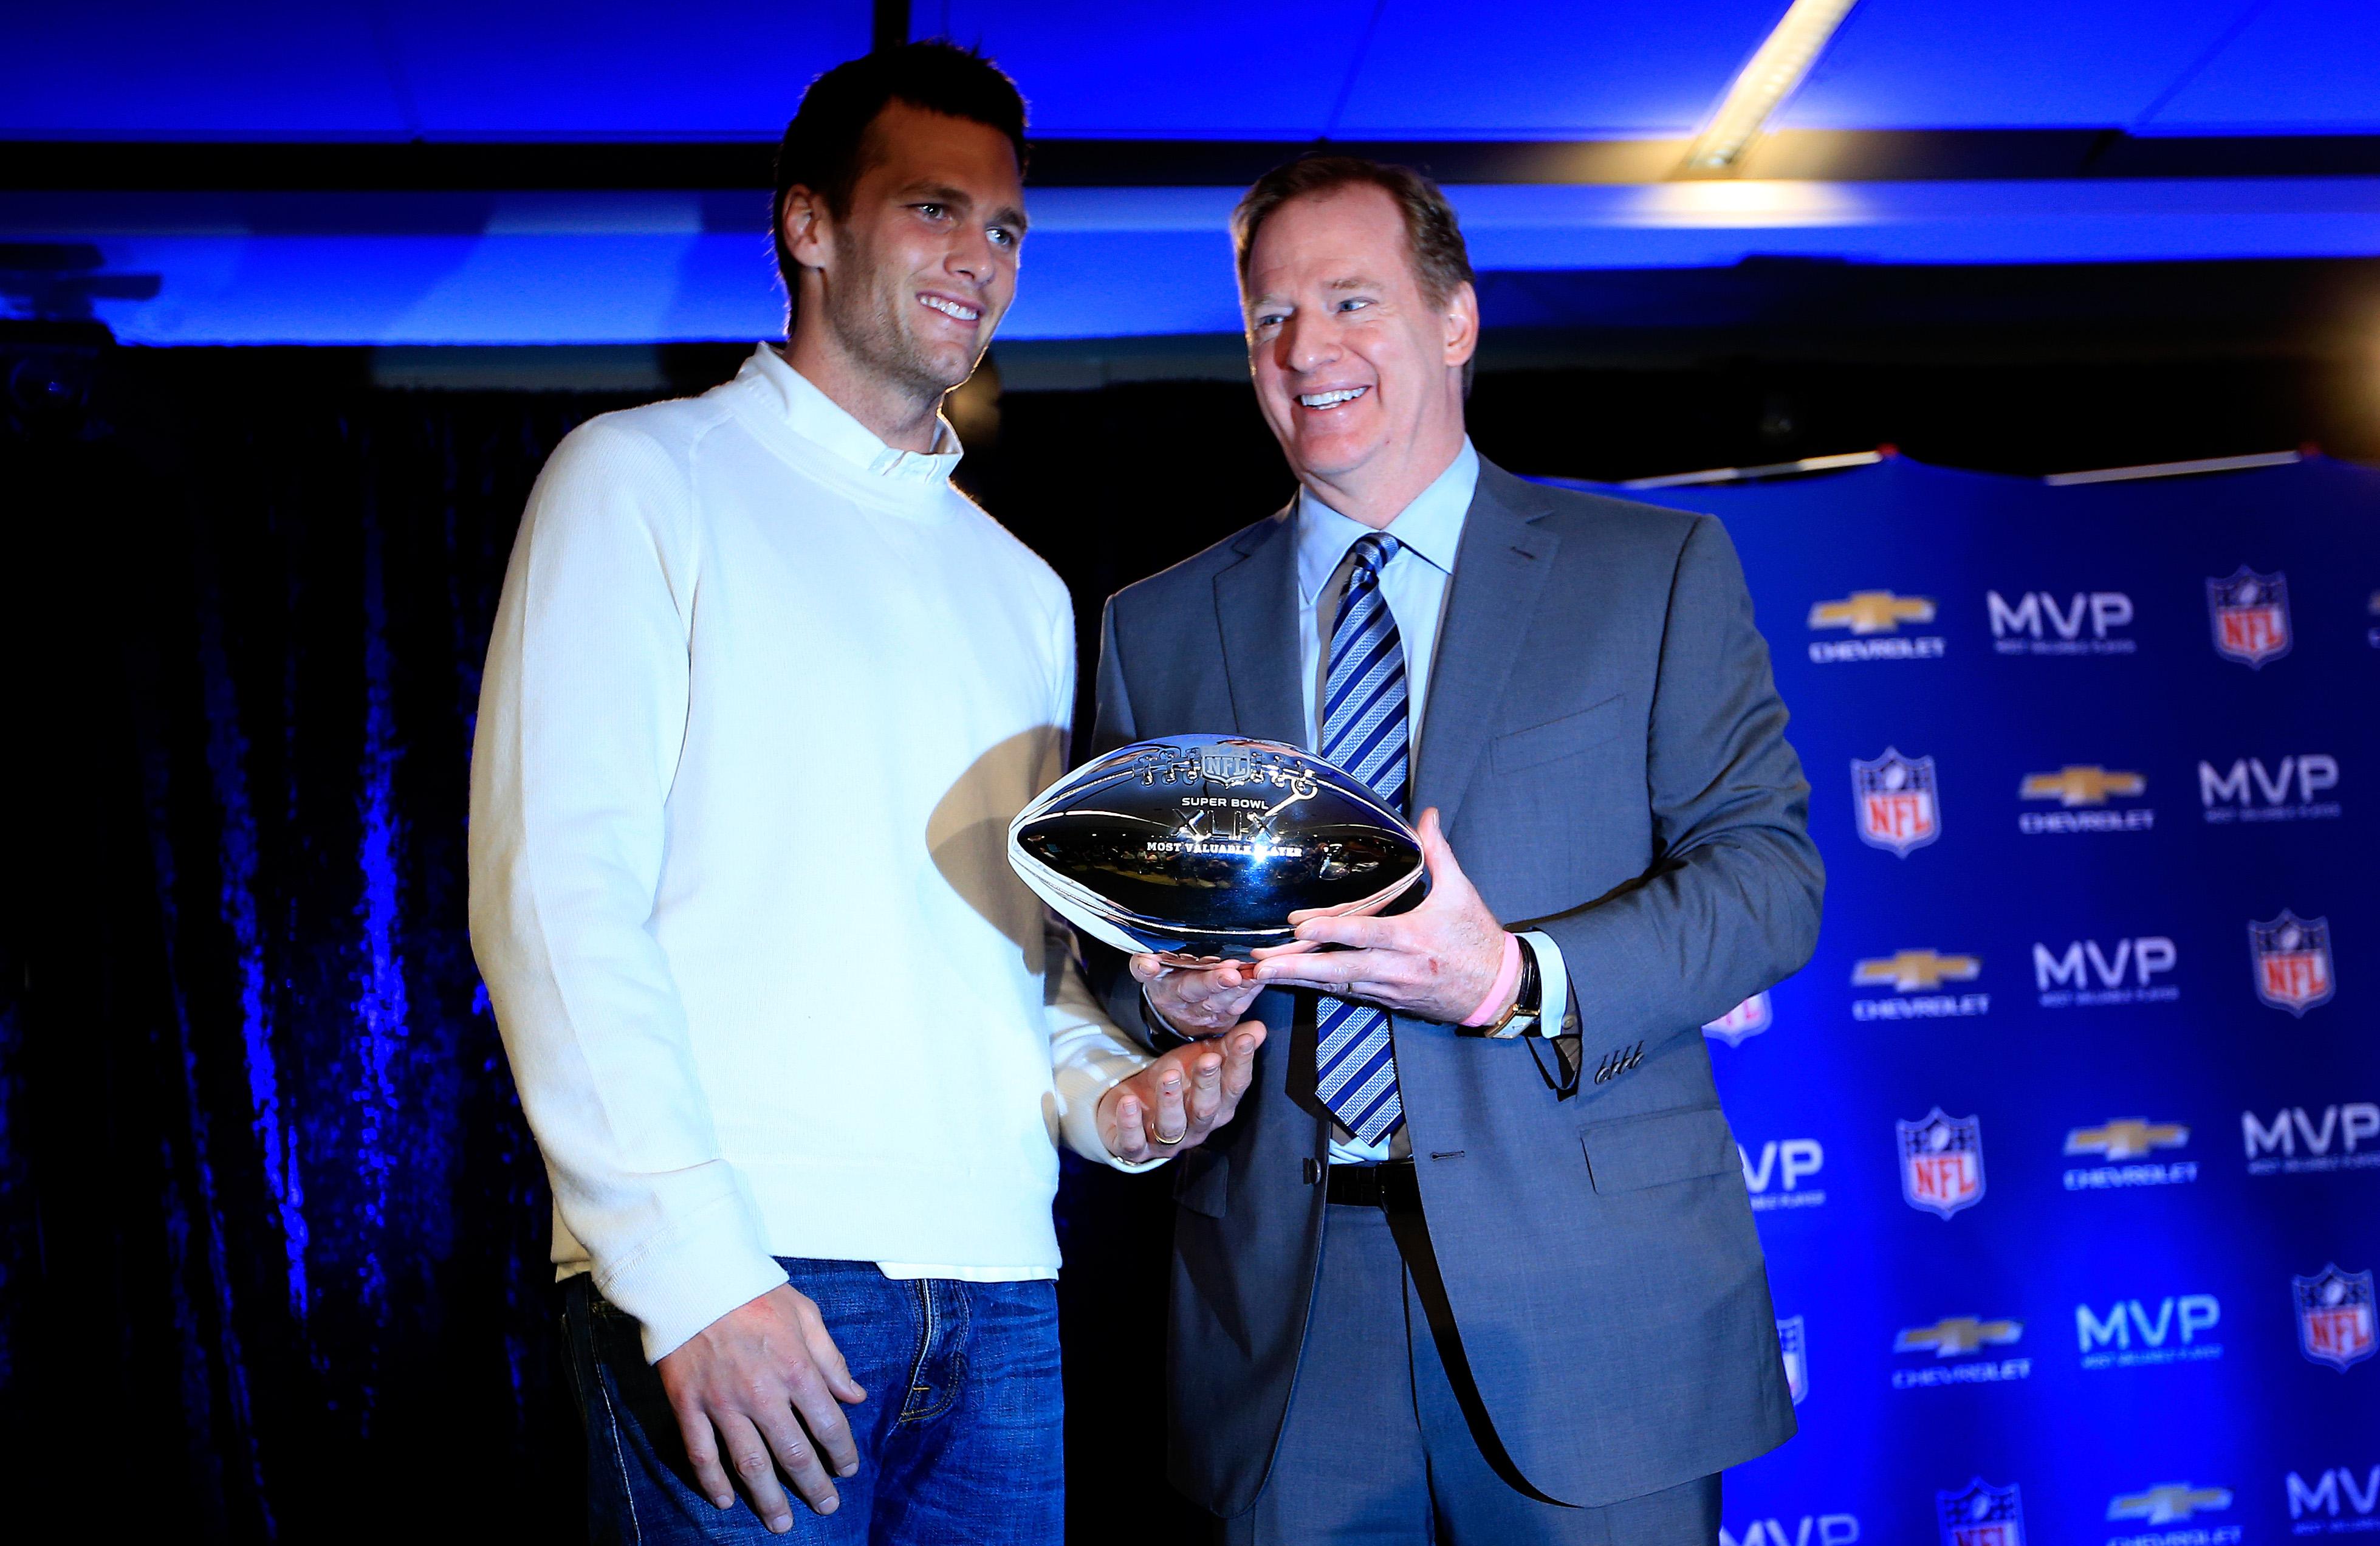 Tom Brady and Roger Goodell stand together on stage.